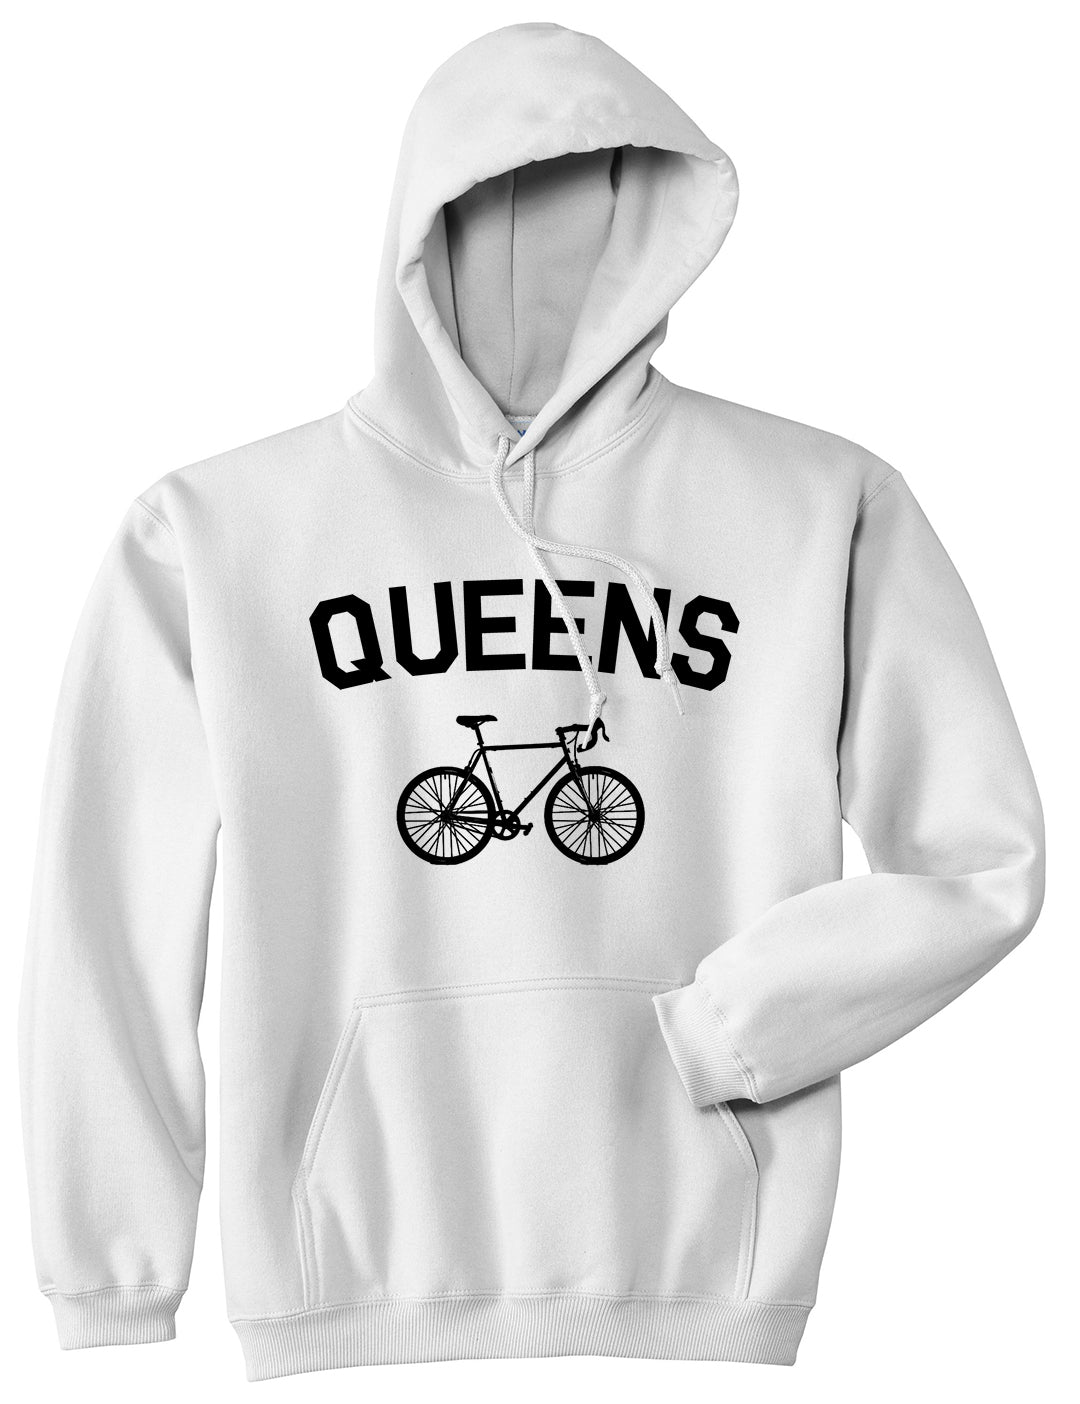 Queens New York Vintage Bike Cycling Mens Pullover Hoodie White